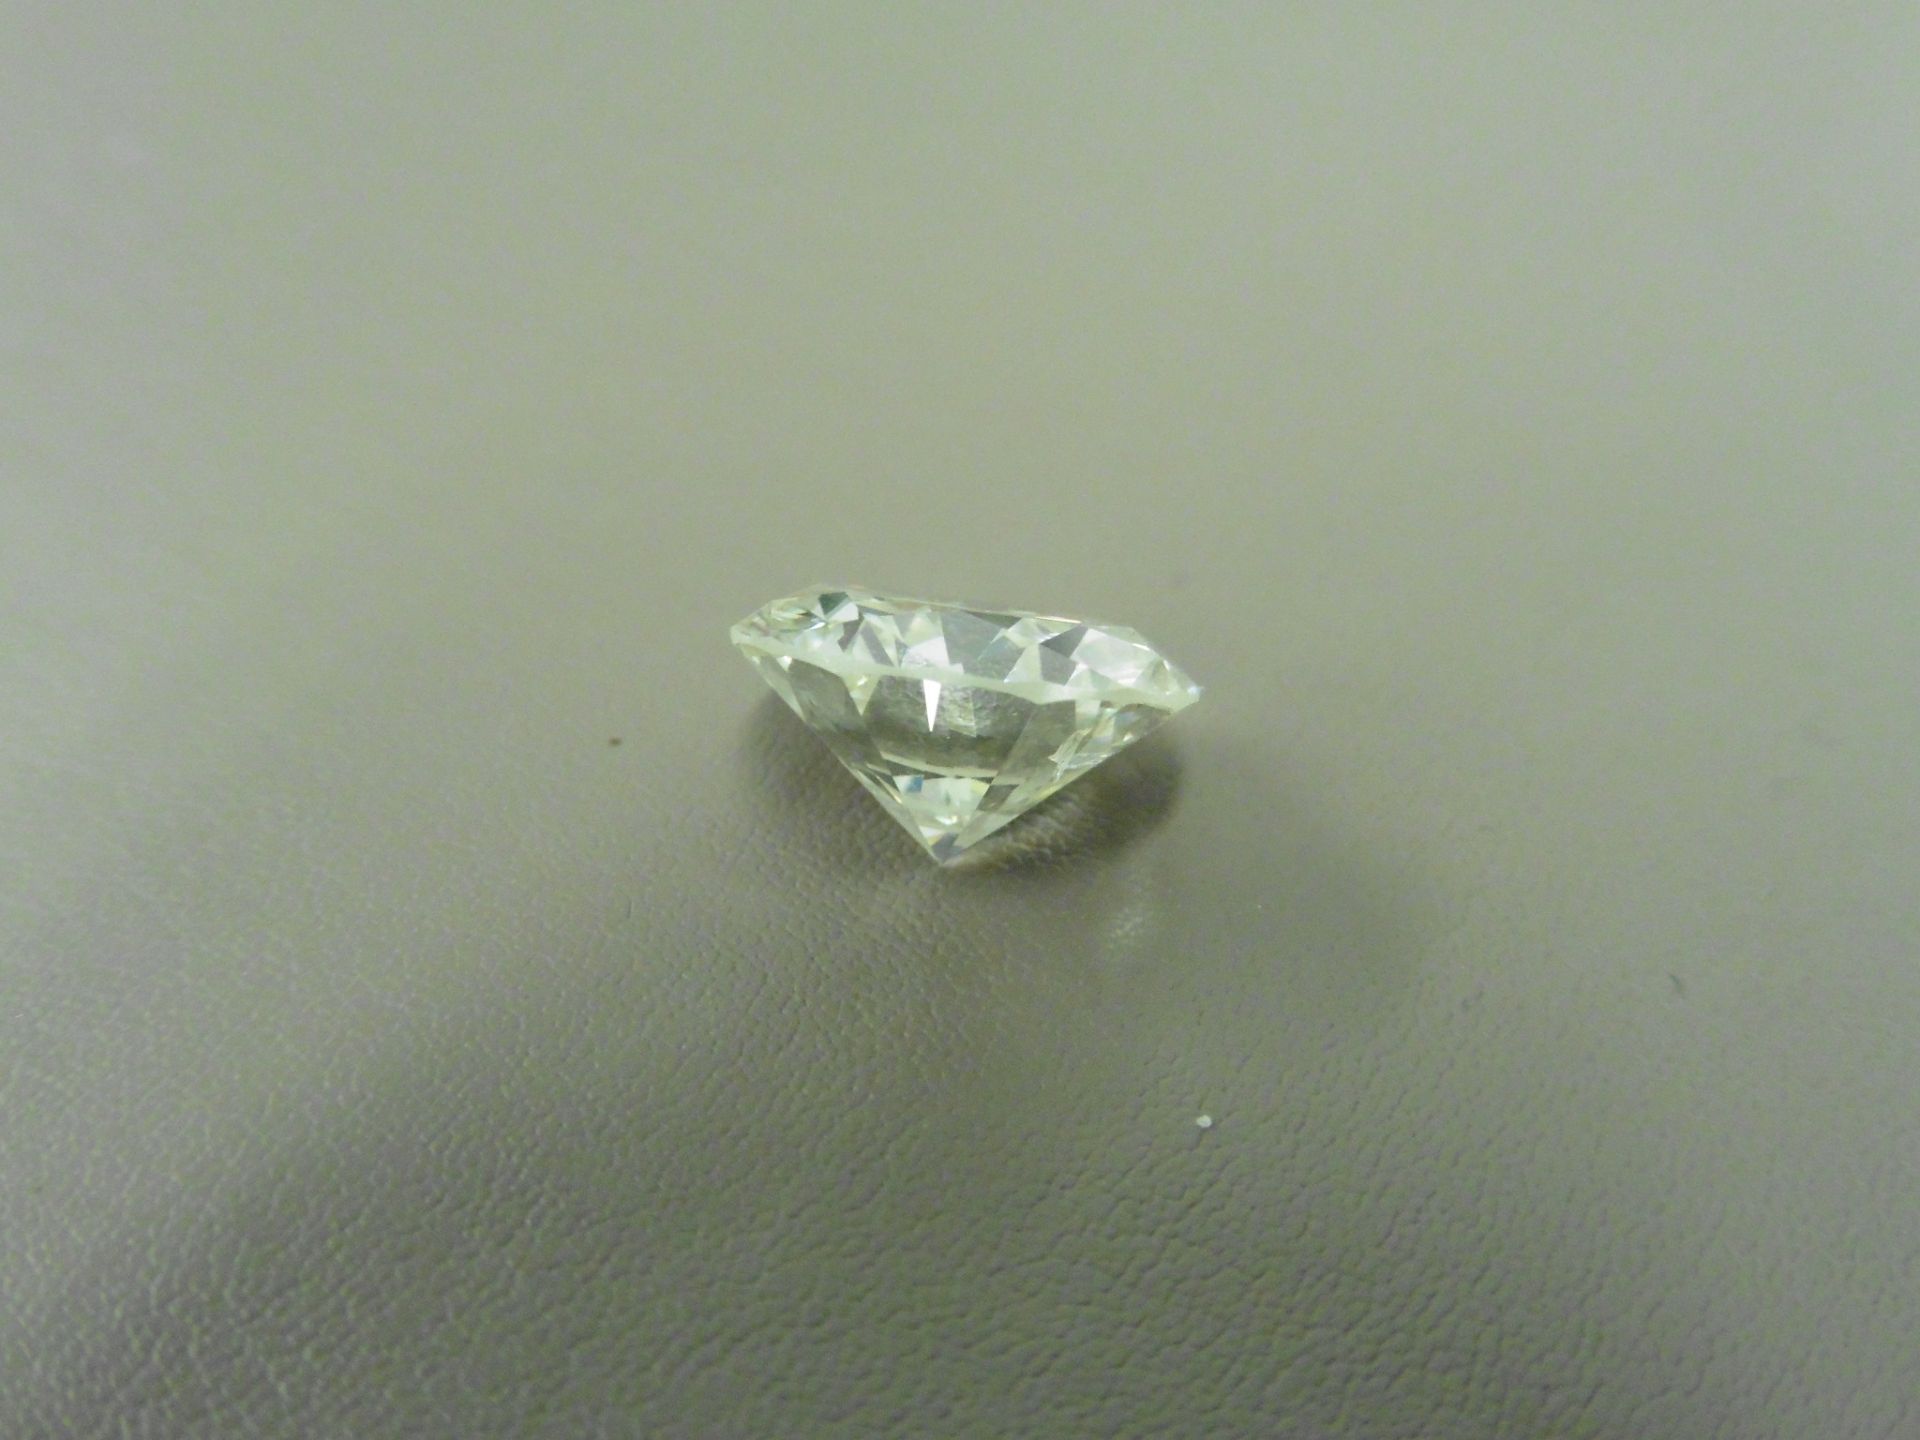 6.38ct natural loose brilliant cut diamond. K colourand I1 clarity. EGL certification. Valued at £ - Image 2 of 5